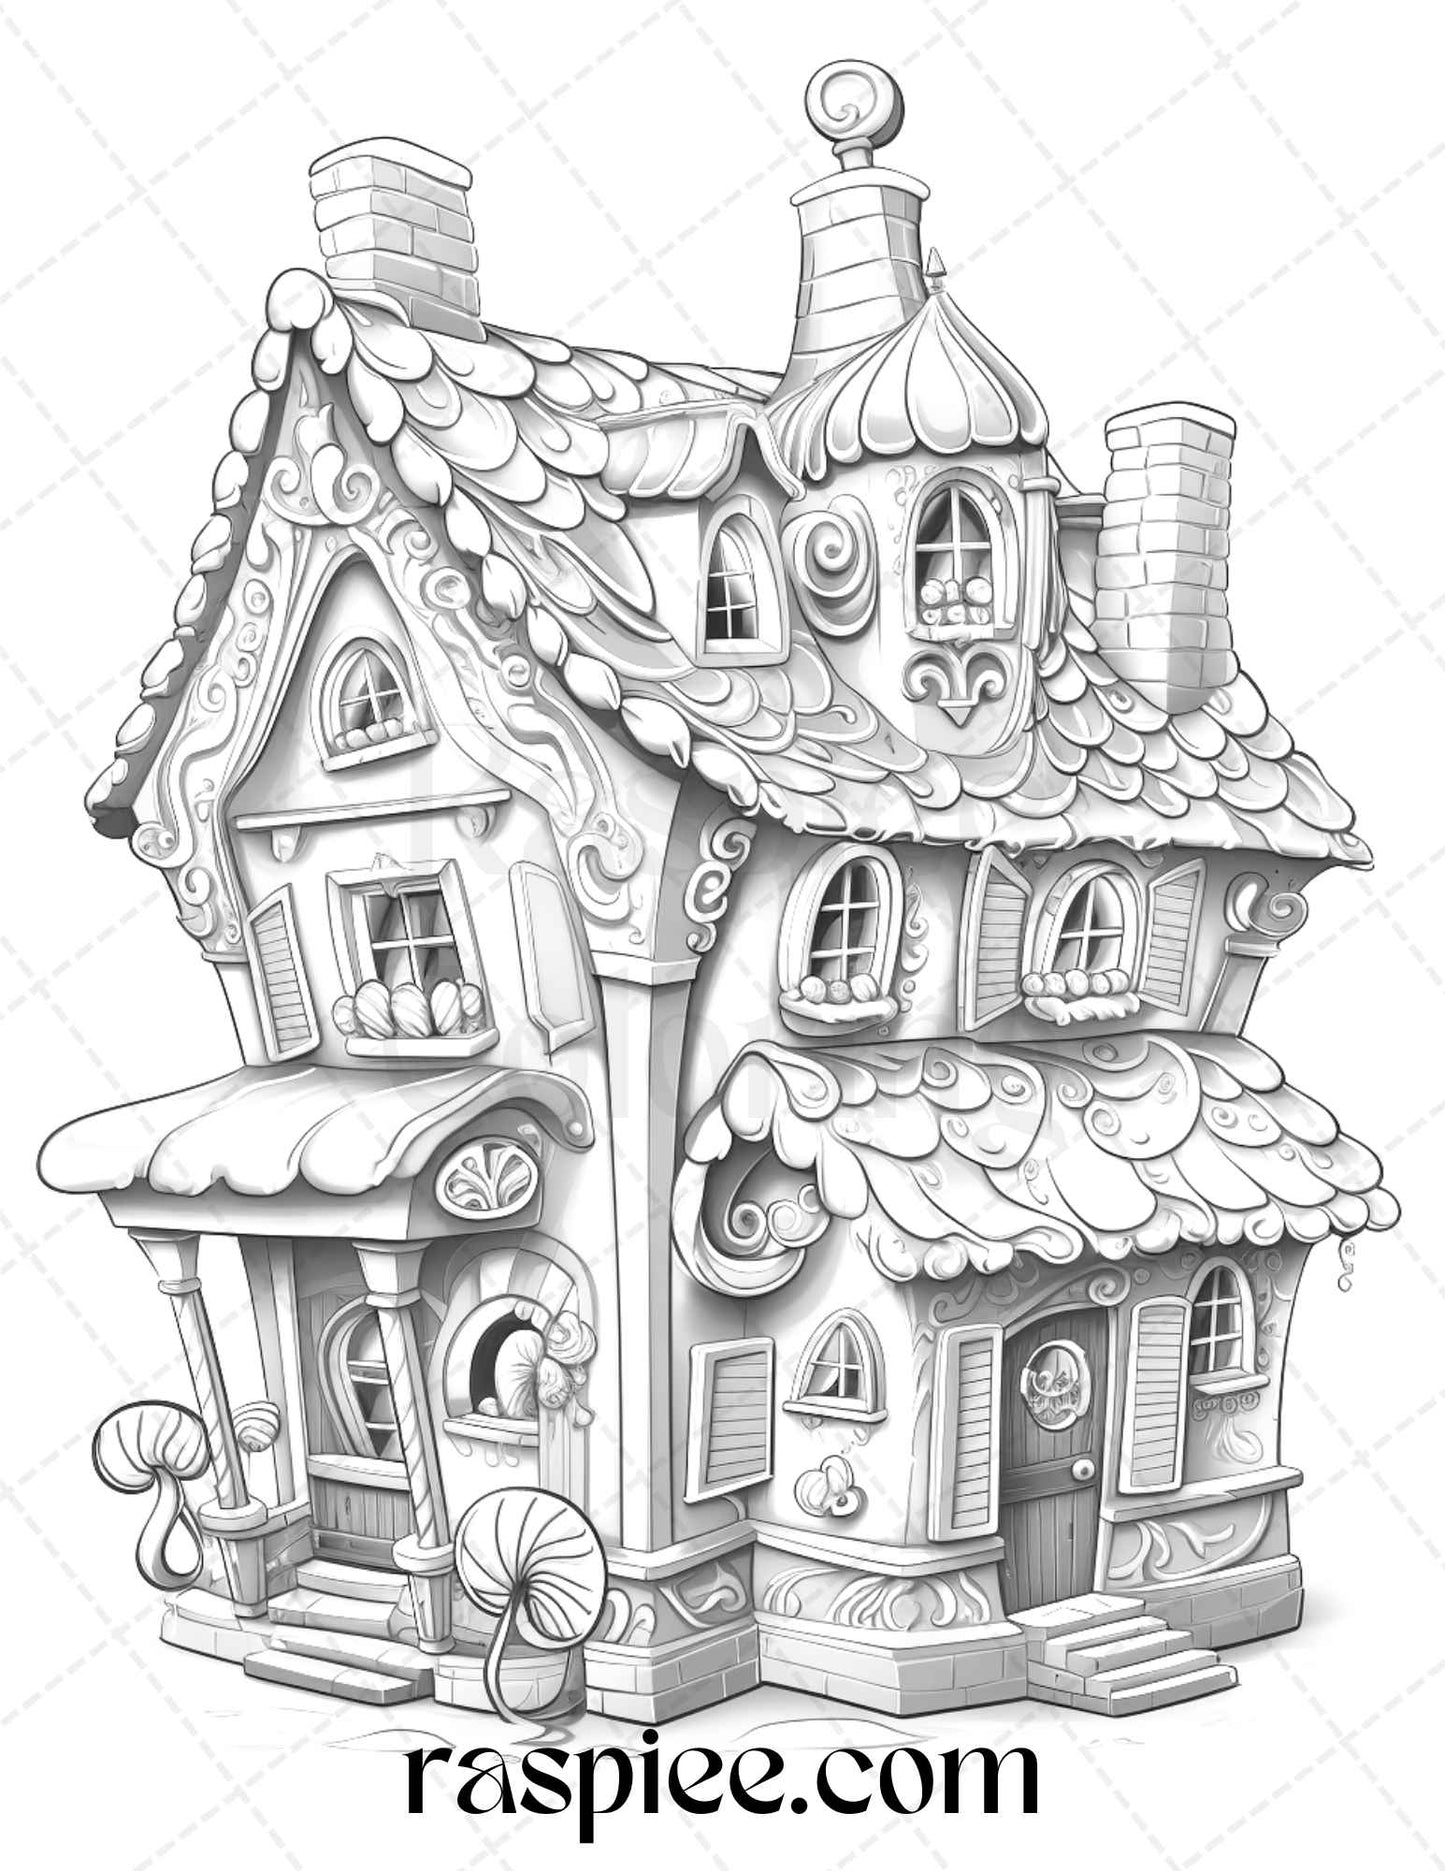 40 Christmas Gingerbread Houses Grayscale Coloring Pages Printable for Adults Kids, PDF File Instant Download - Raspiee Coloring